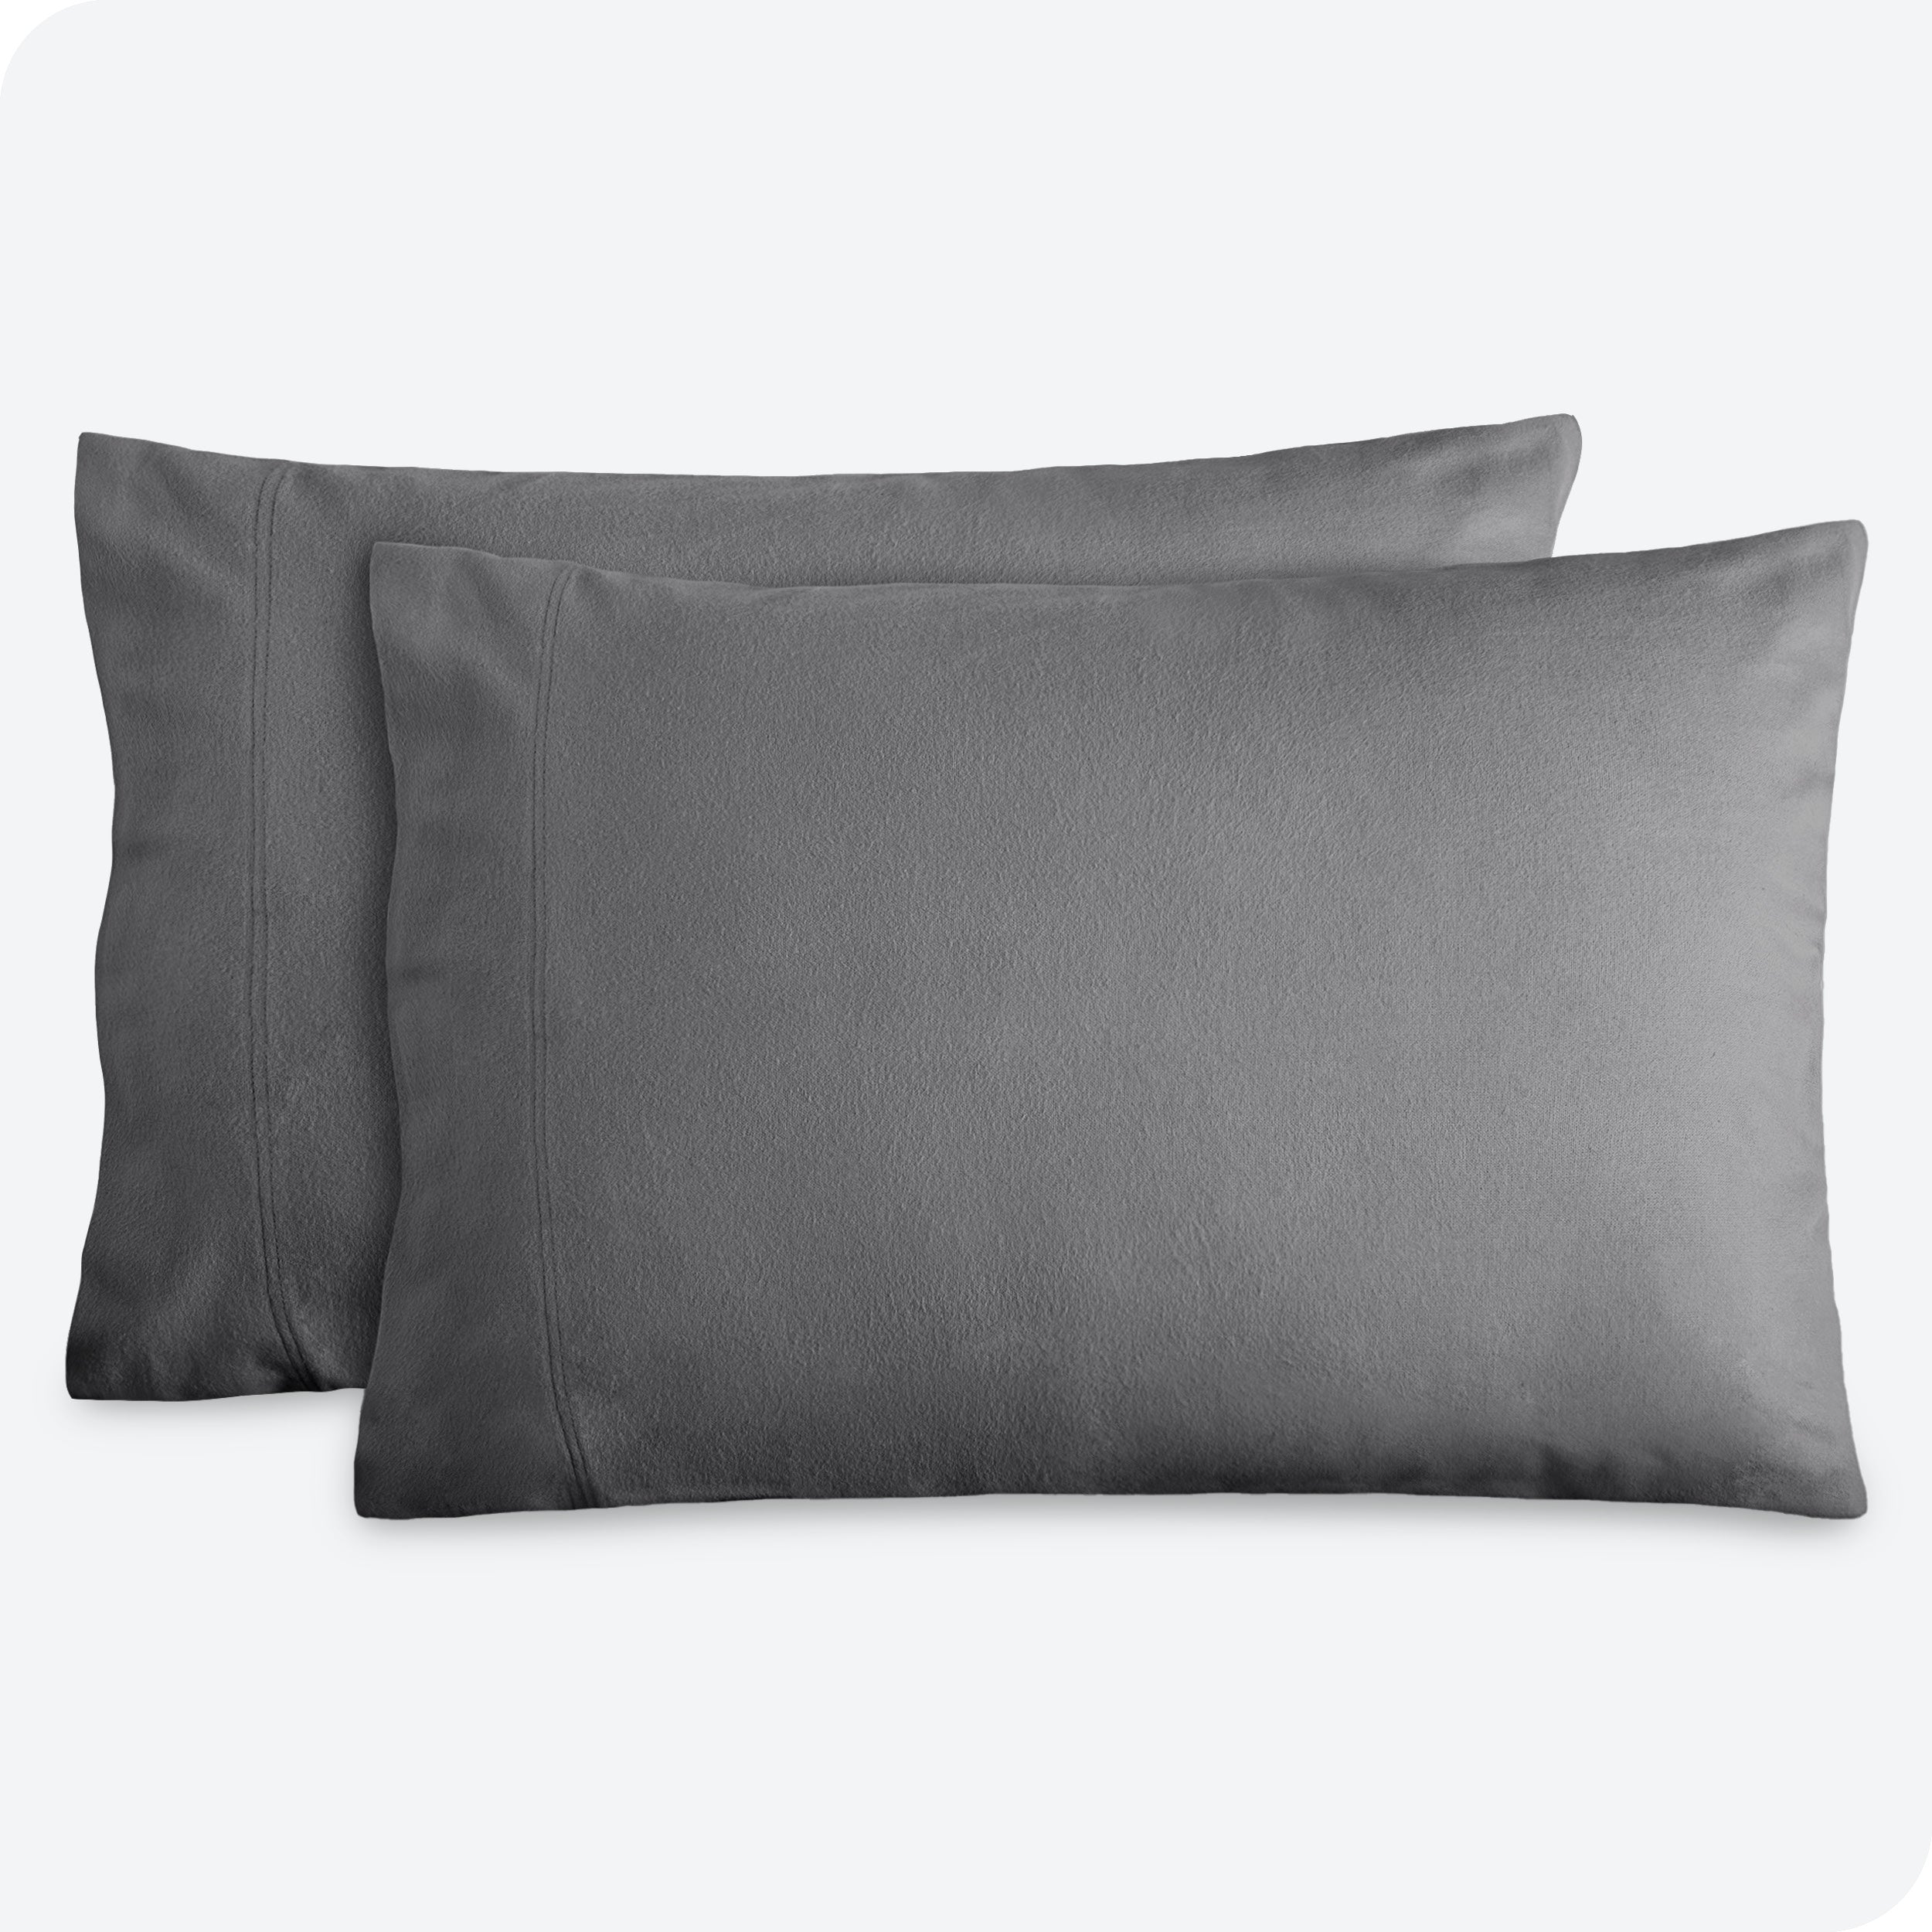 Two pillows with flannel pillowcases on them